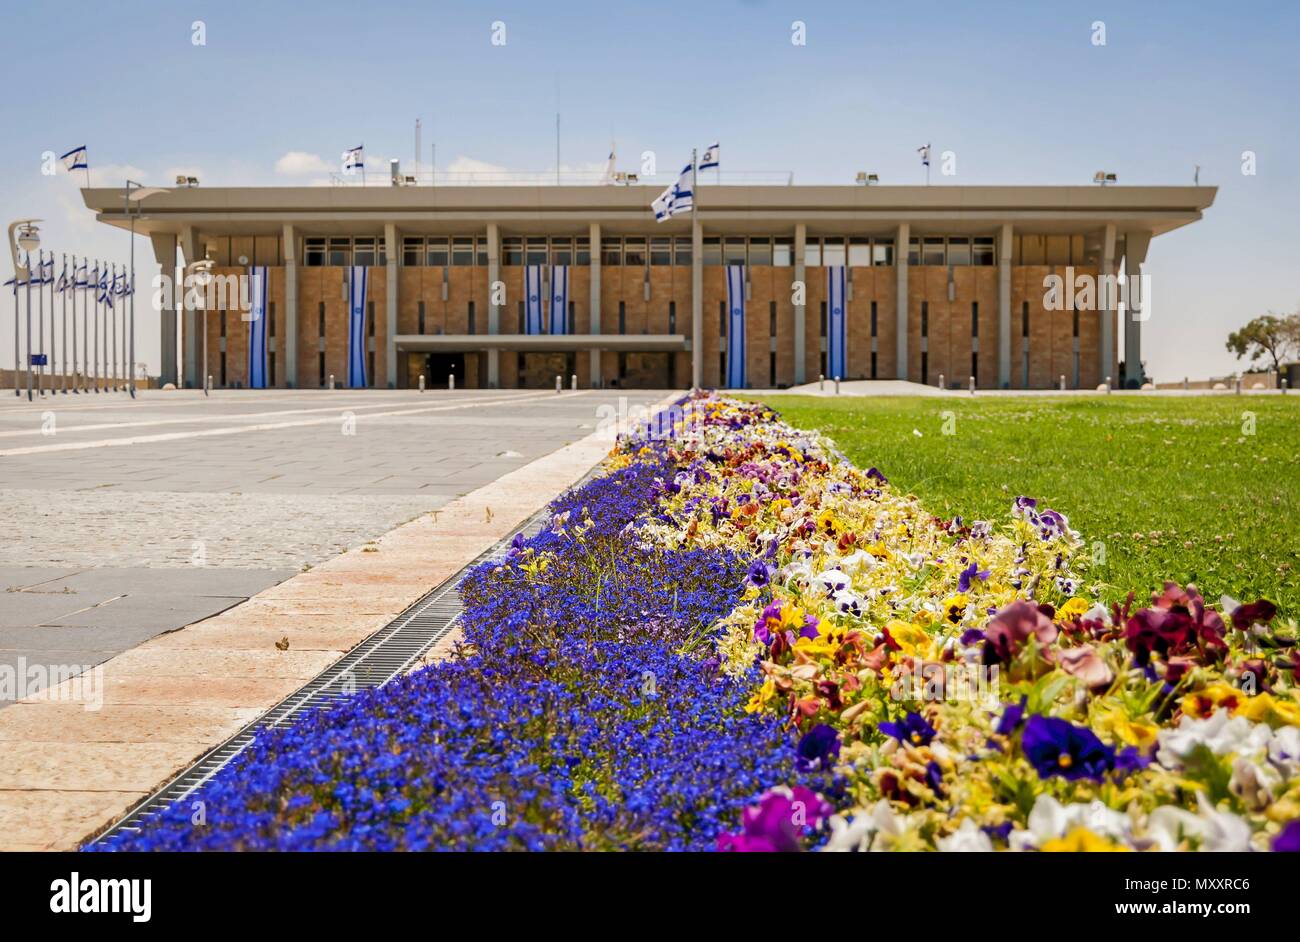 JERUSALEM, ISRAEL. June 10, 2014. A beautiful stock image of the Knesset, Israeli parliament building facade, Knesset exterior with colorful flowers. Stock Photo